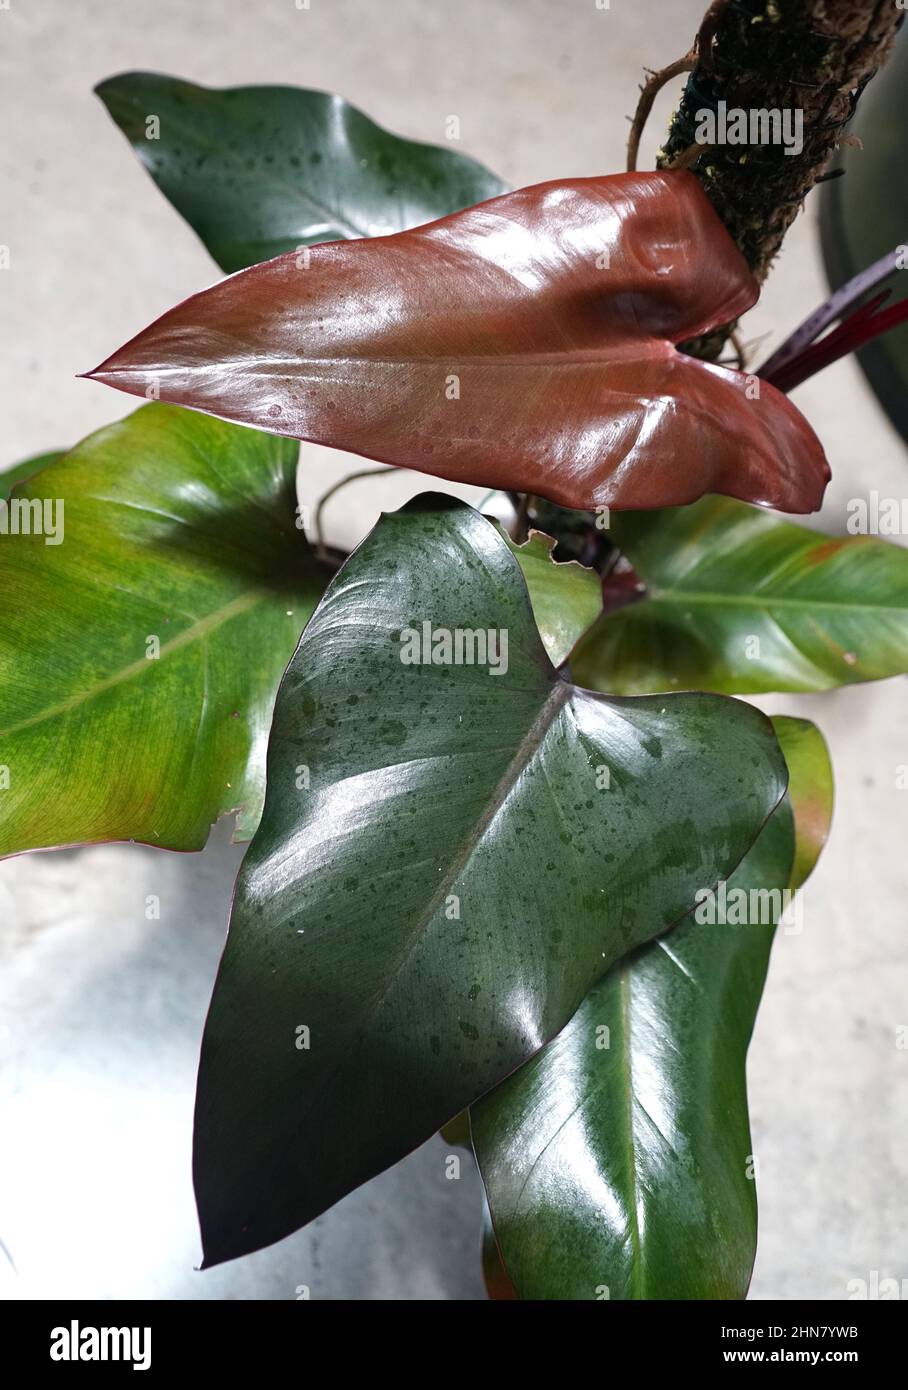 The shiny leaves of Philodendron Dark Lord, a popular rare and exotics houseplant Stock Photo